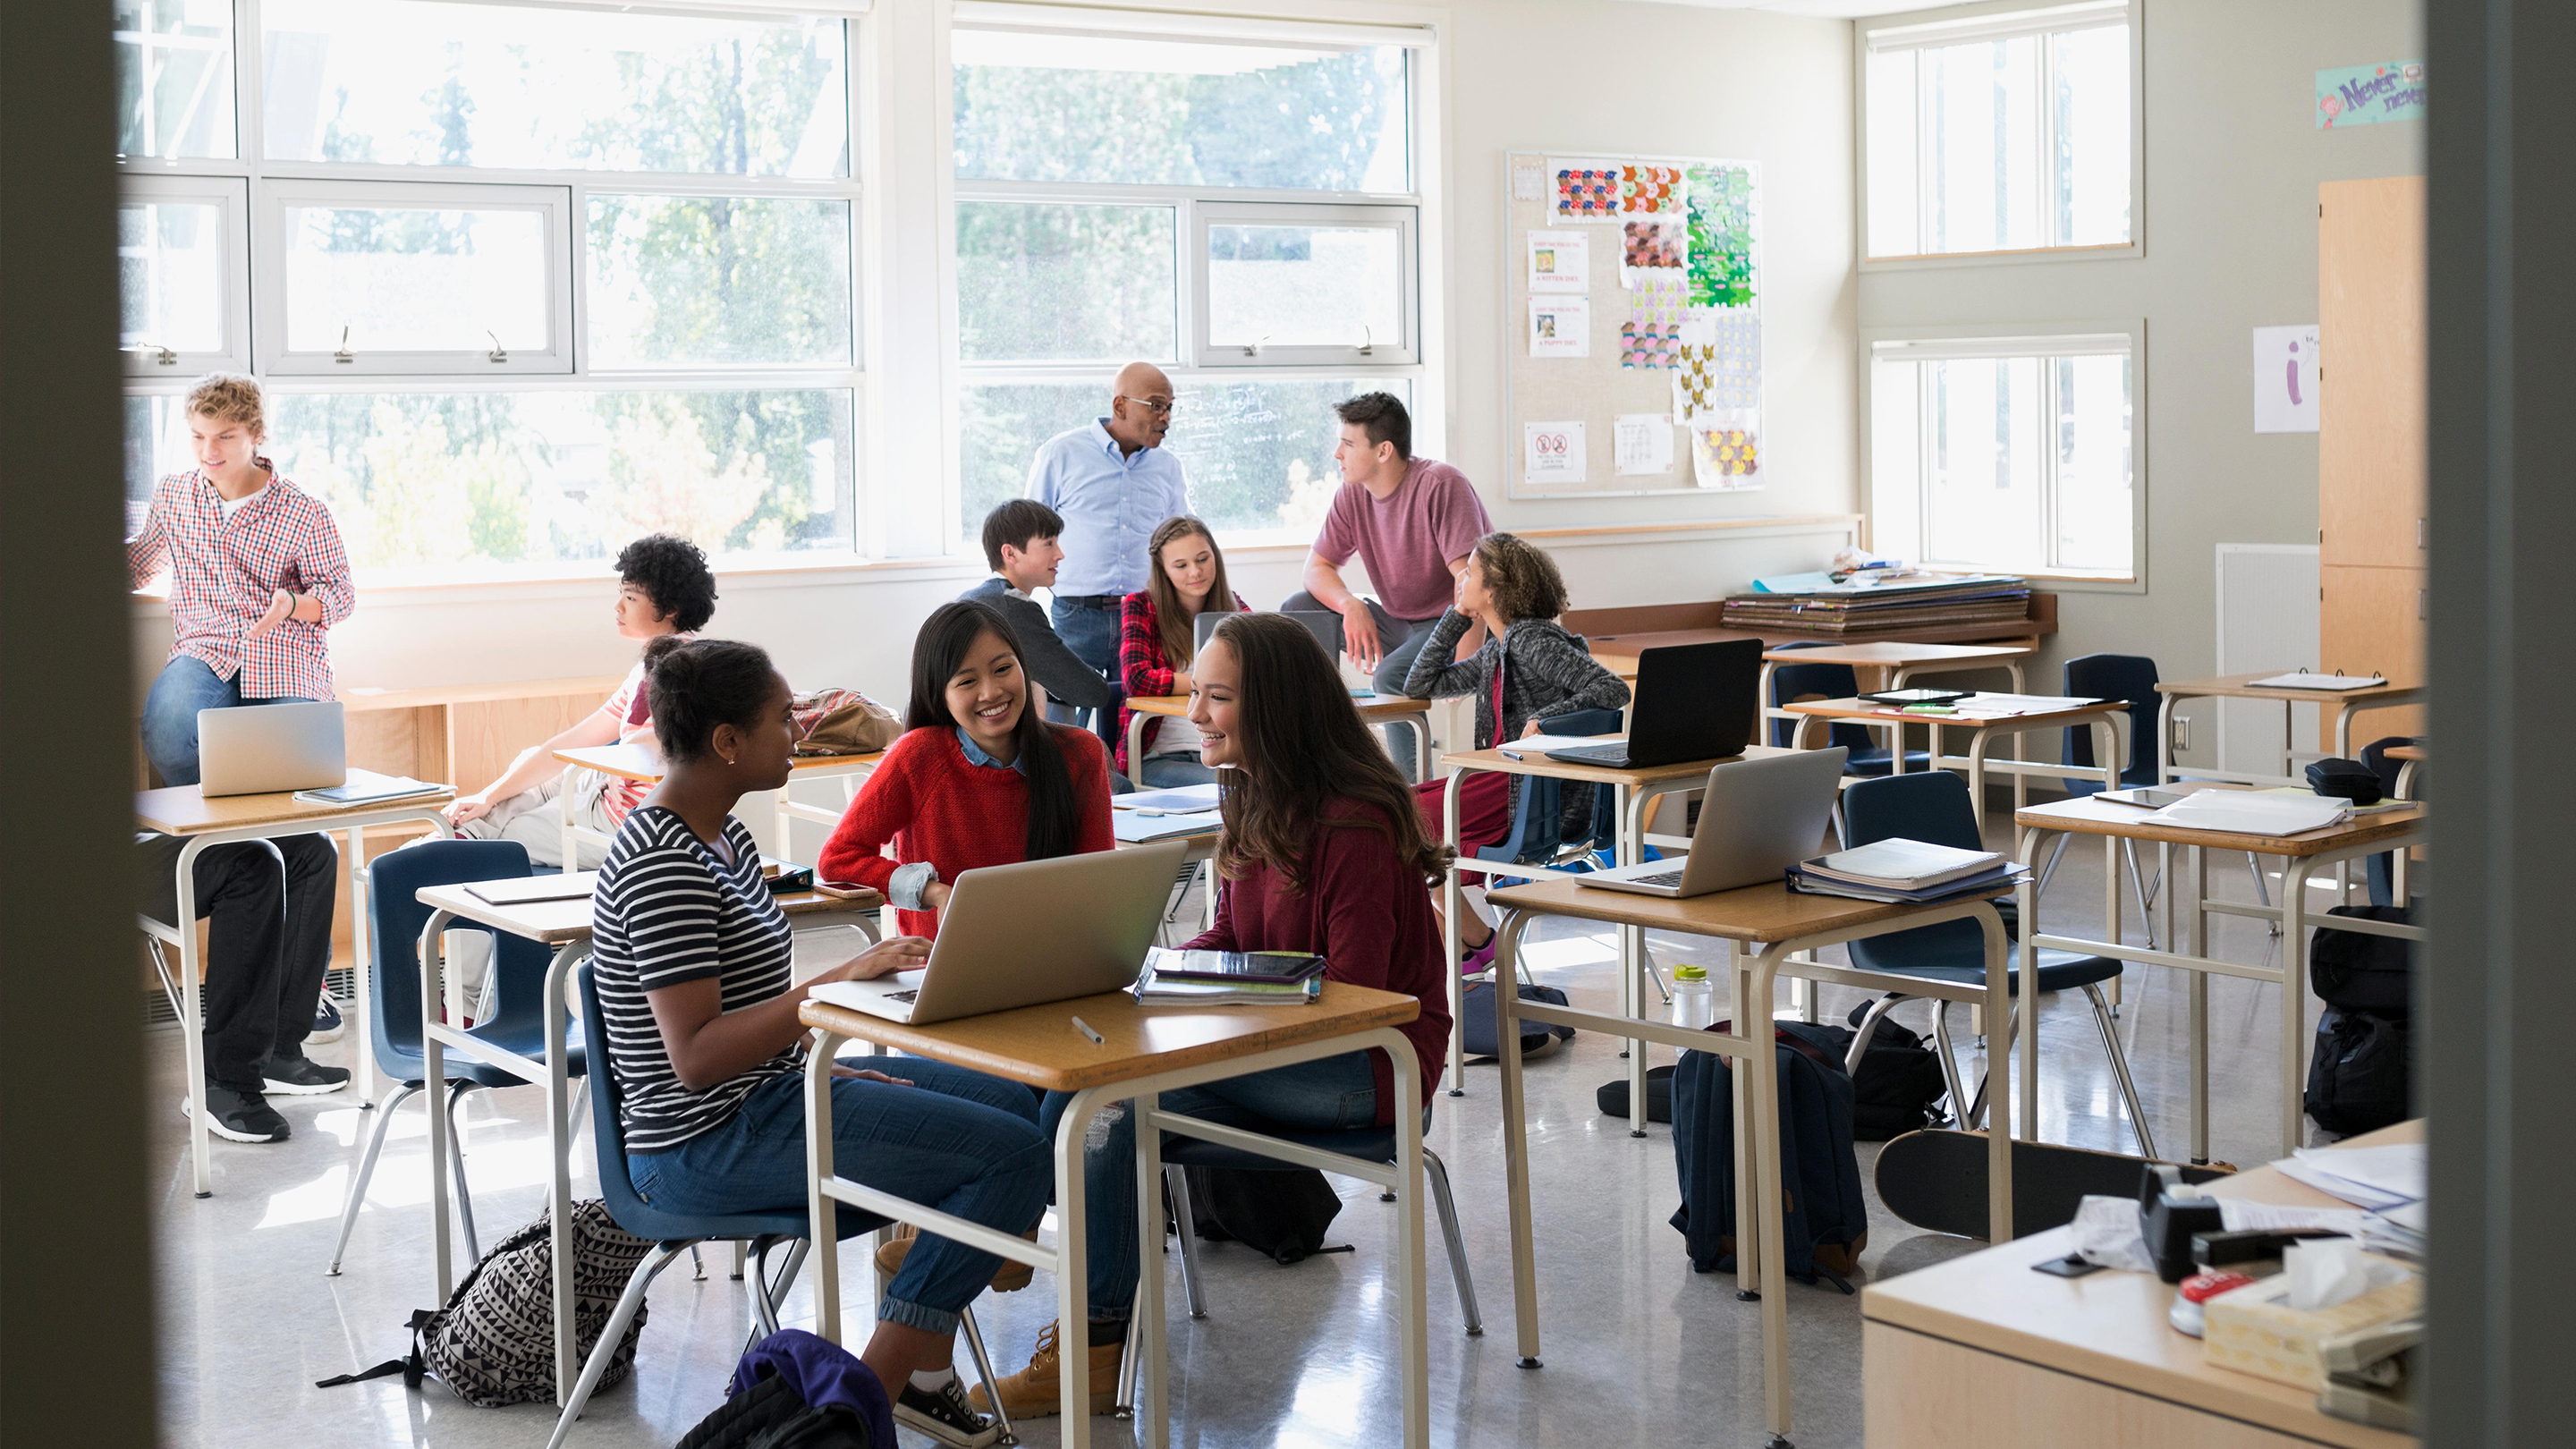 7 Ways to Build a Learner-Centered Classroom for High School | Edutopia